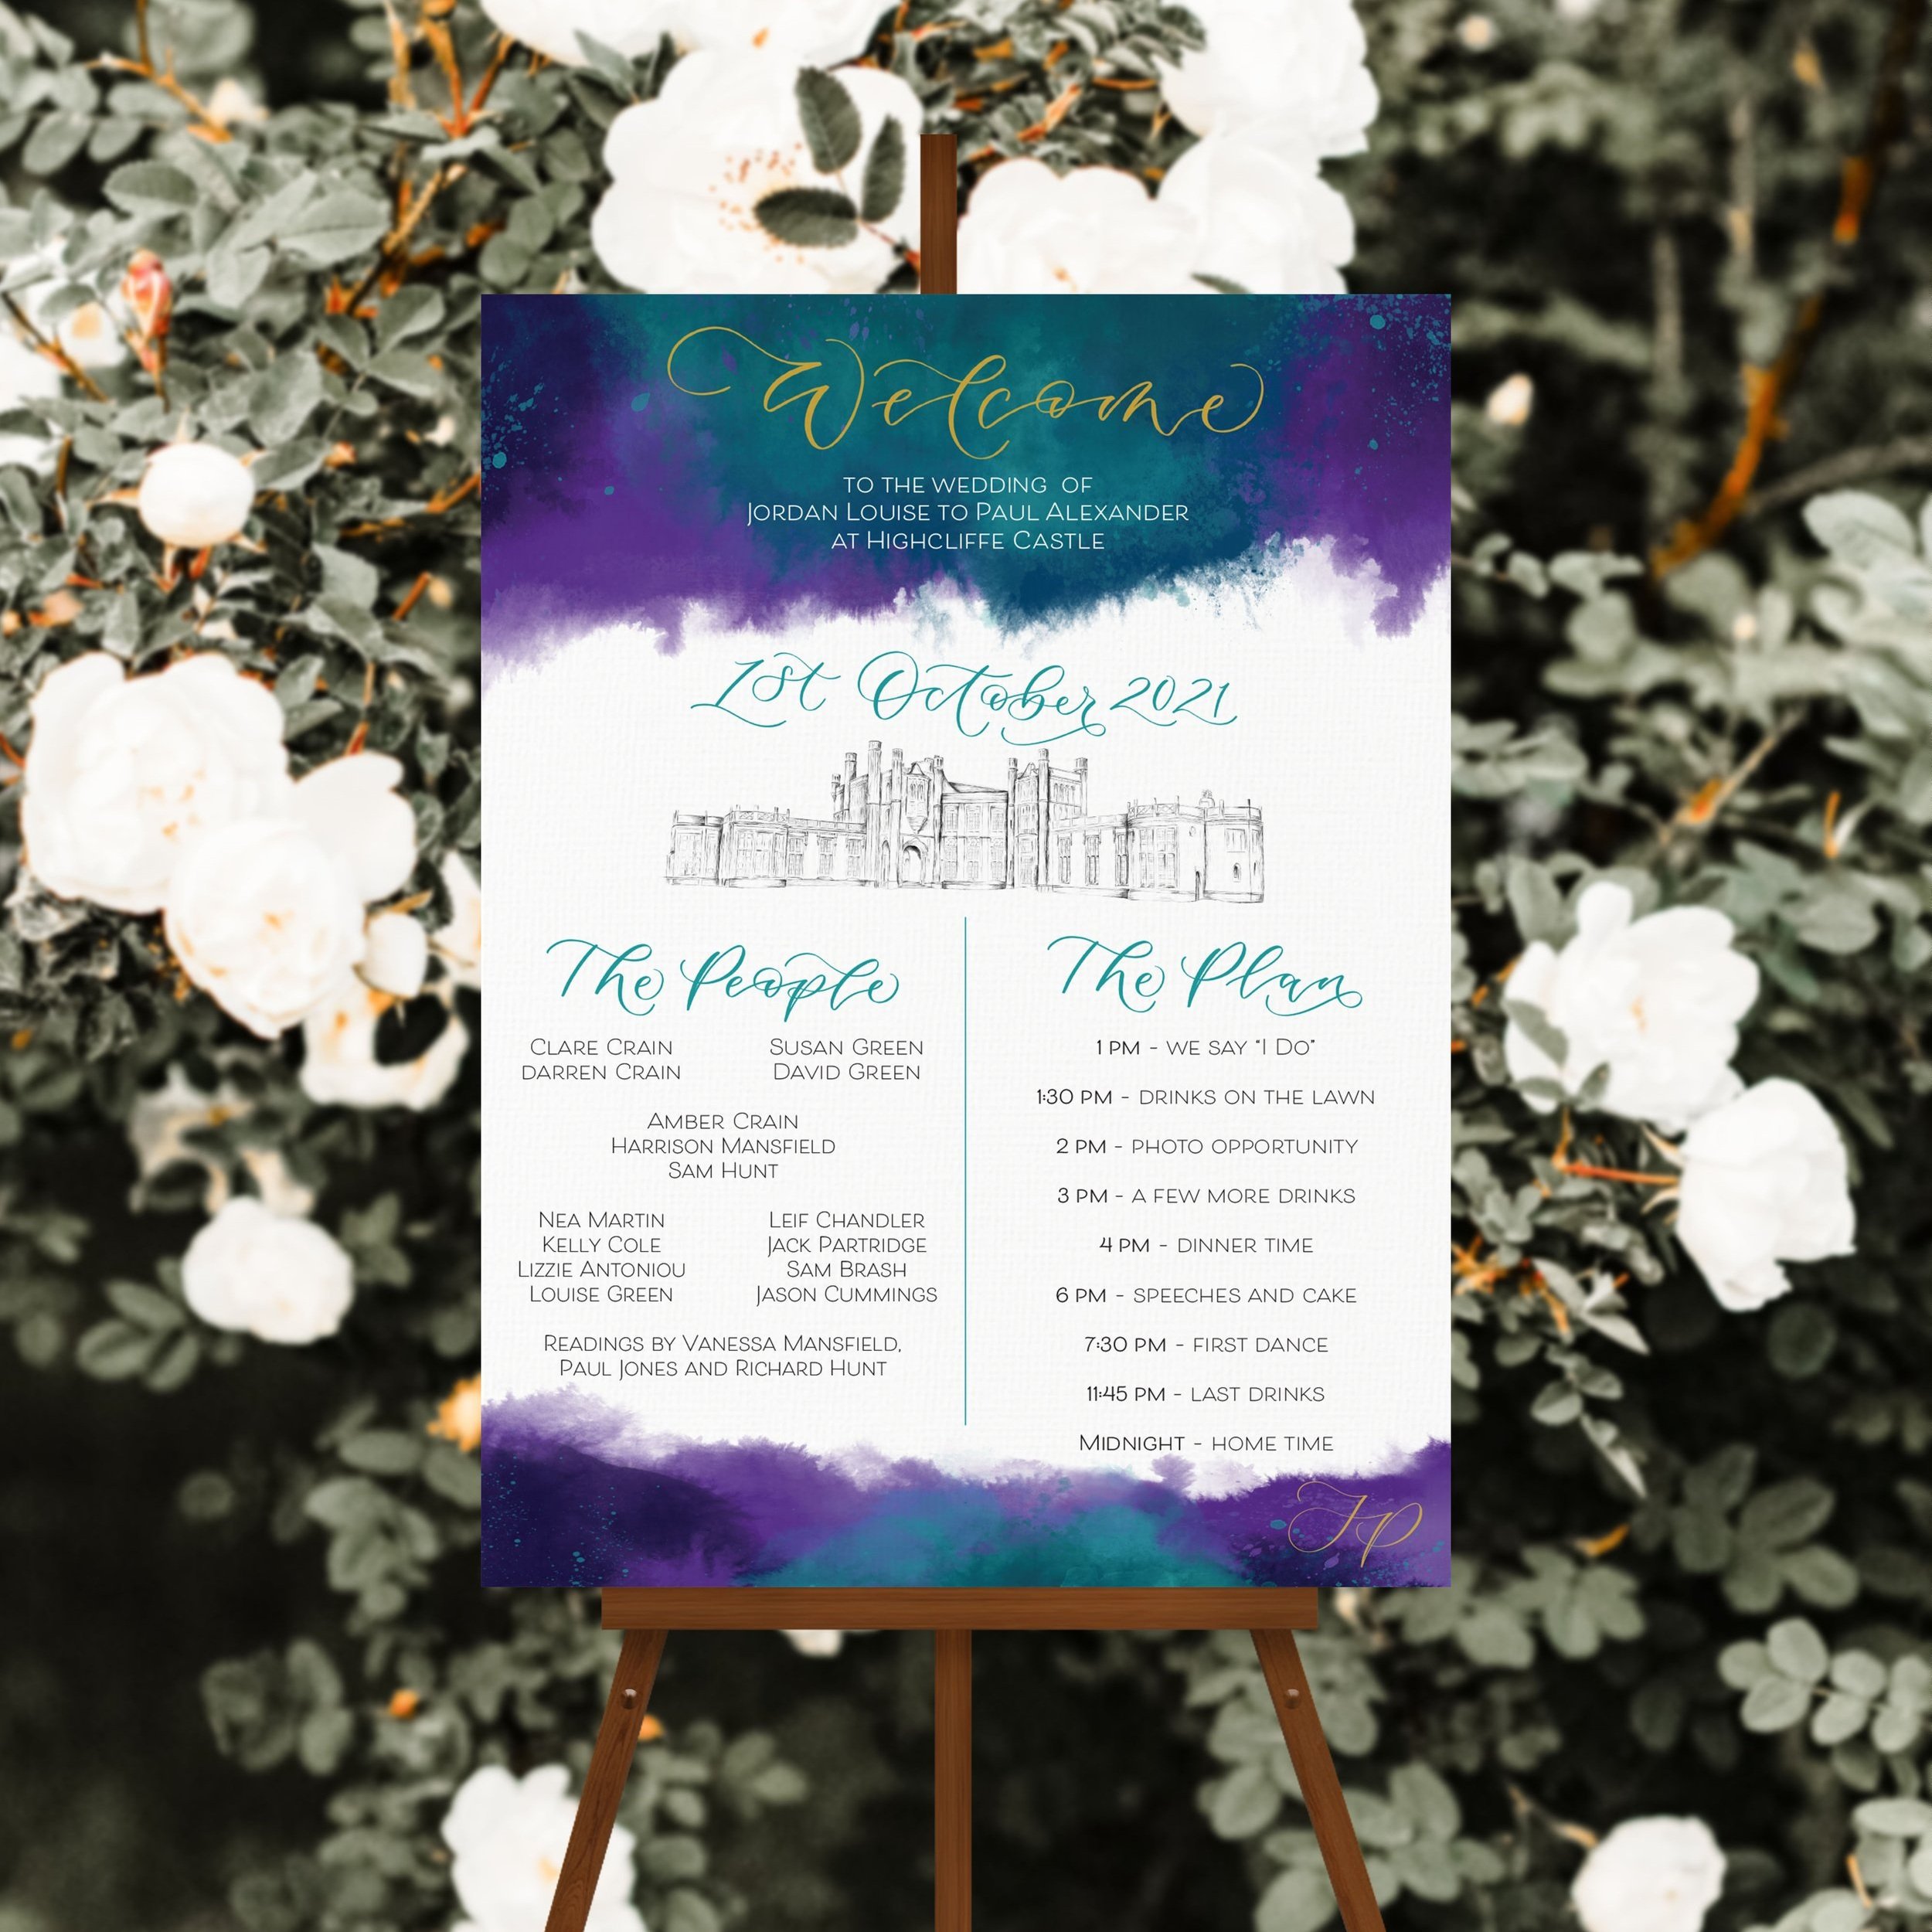 Highcliffe+Hotel+wedding+sign+-+wedding+welcome+sign+-+colourful+watercolour+wedding+signage+with+venue+drawing.jpg